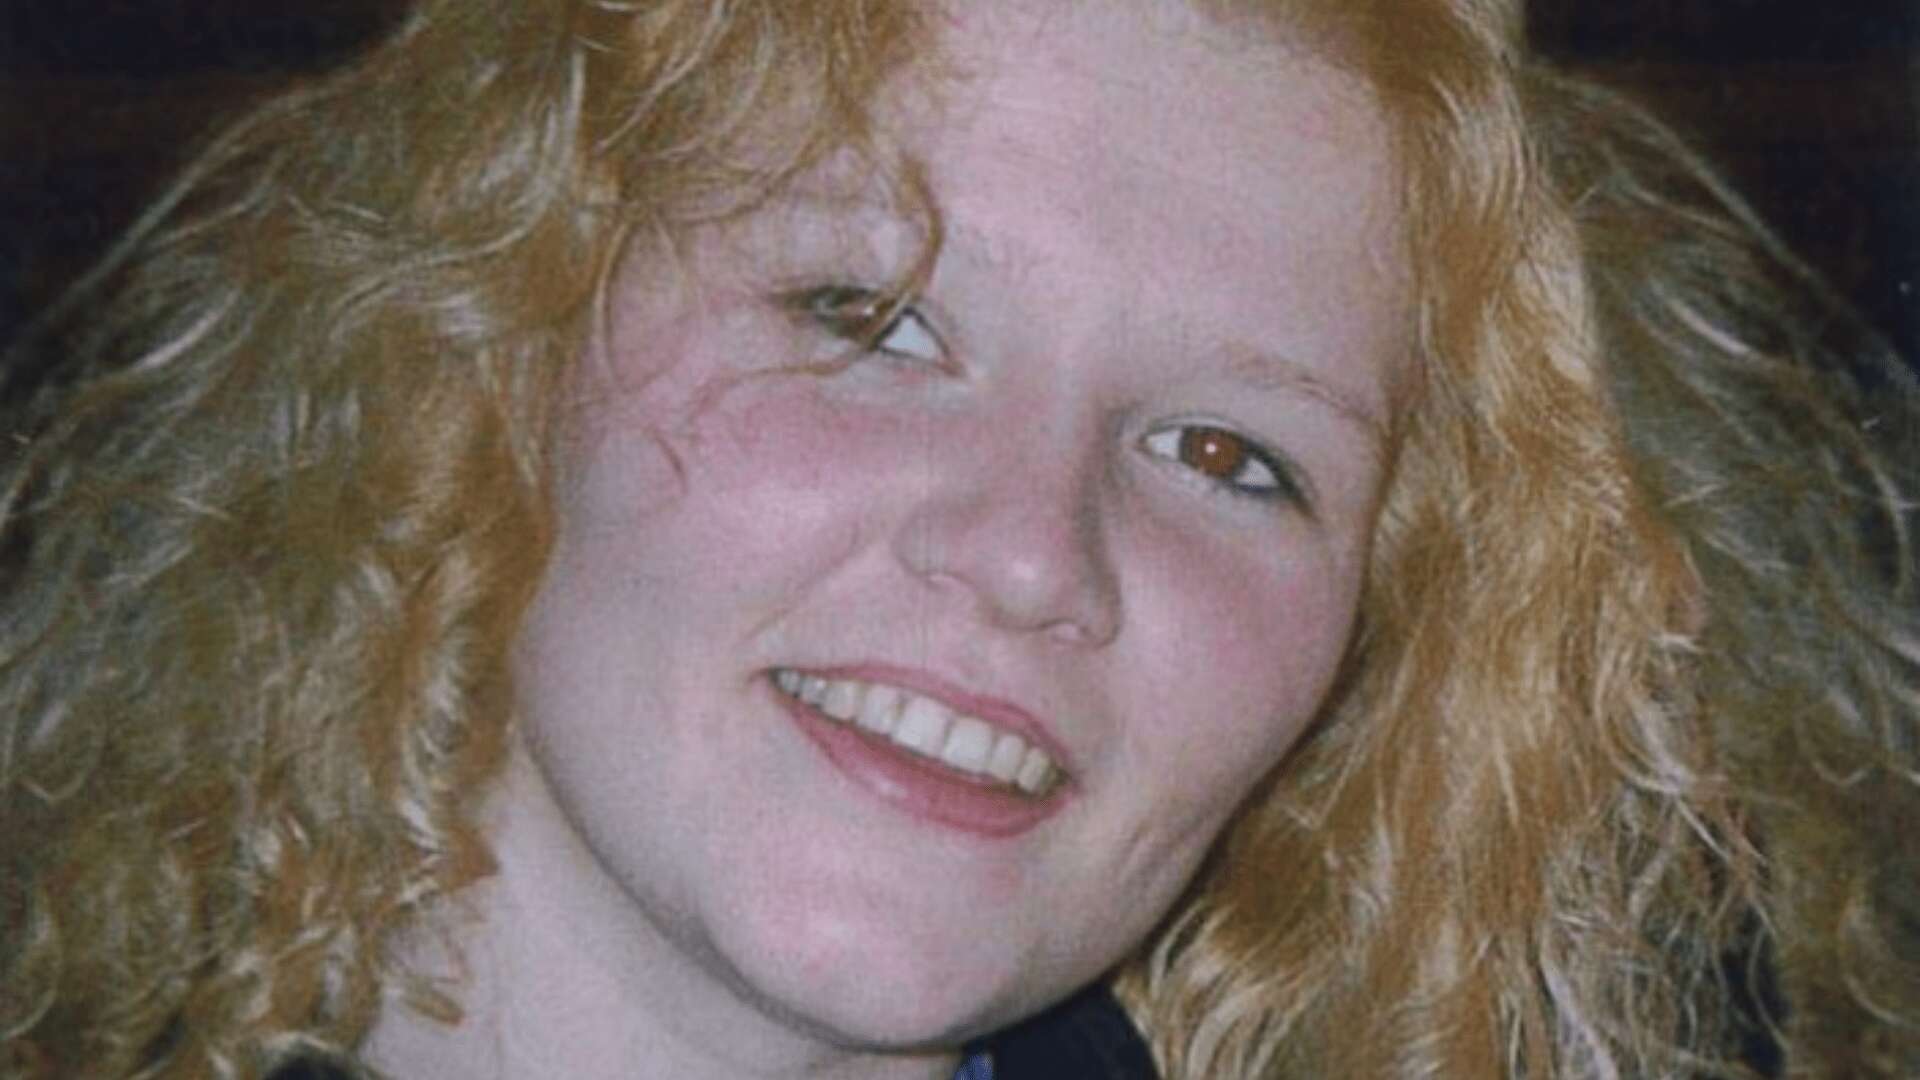 Evil killer GUILTY of murdering sex worker Emma Caldwell 20 years ago